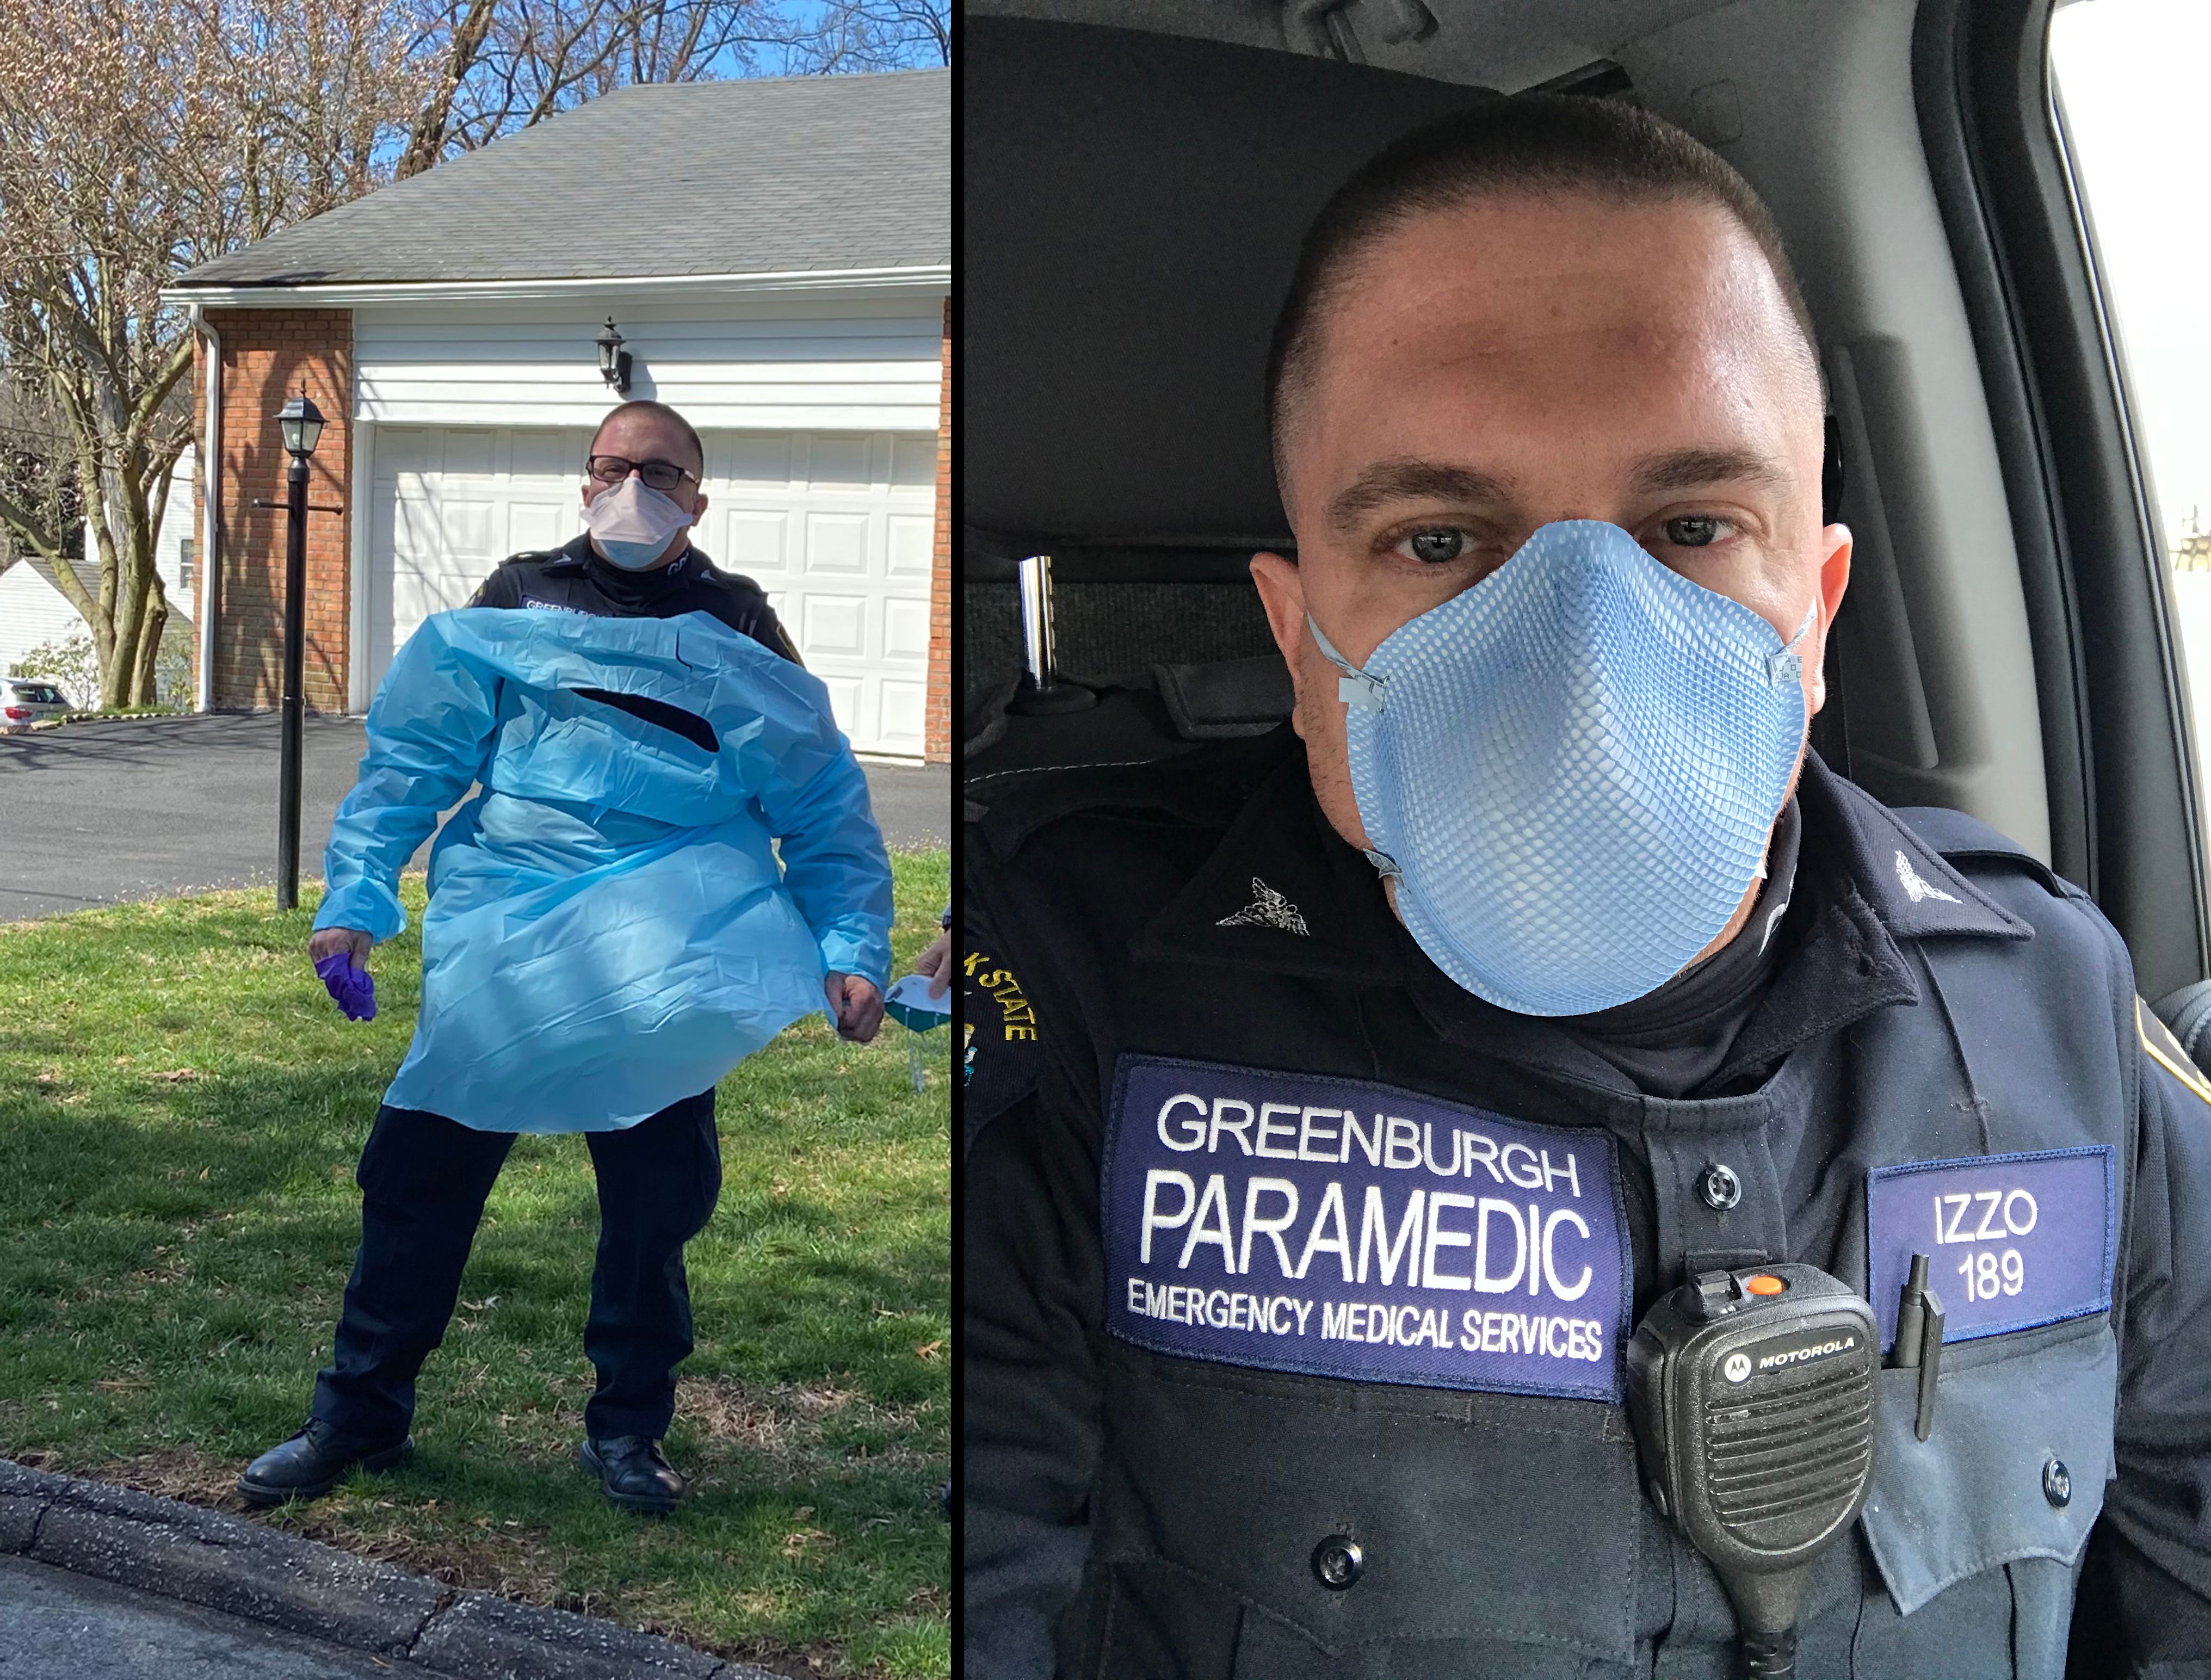 Donny Izzo, a paramedic with the Greenburgh Police Department's Emergency Medical Services, suits up in protective gear before entering a patient's home to protect himself from being exposed to the coronavirus.